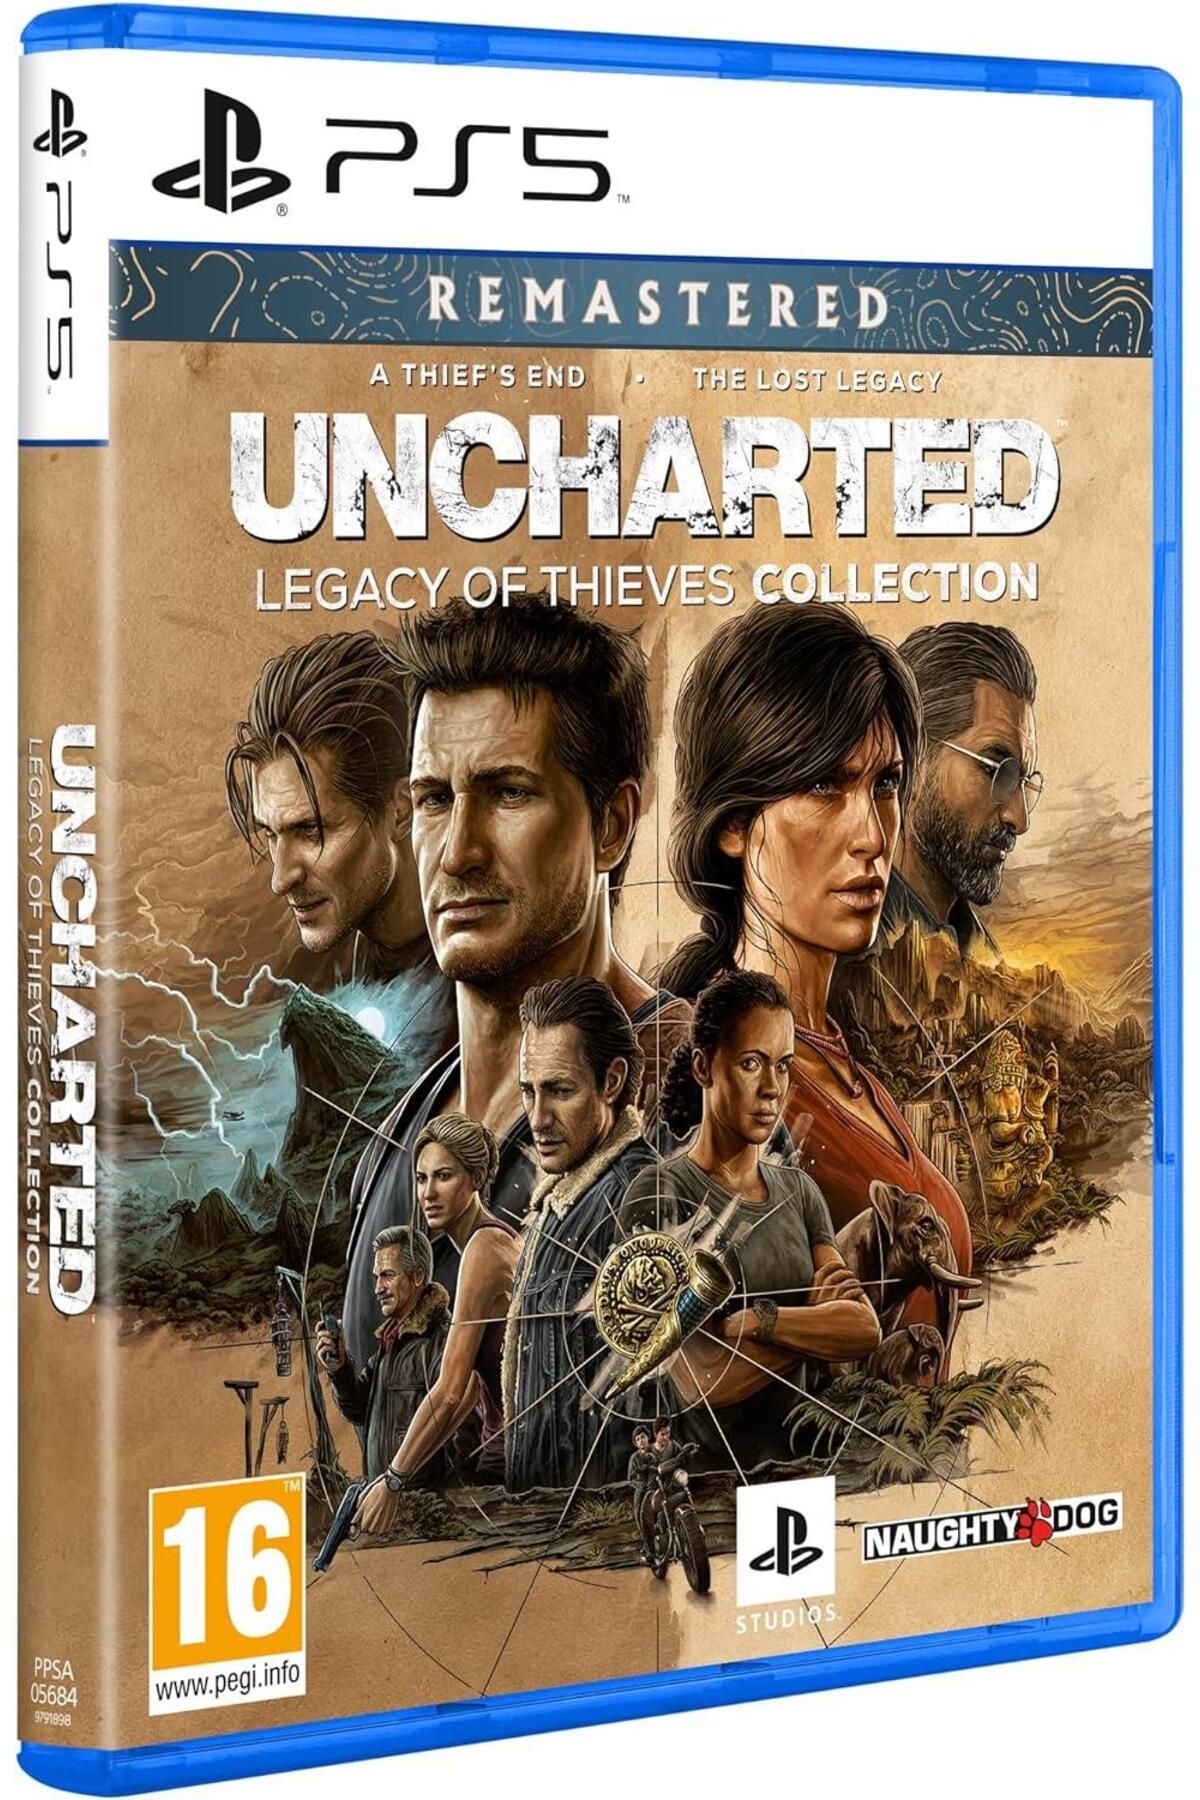 Naughty Dog Uncharted Legacy Of Thieves Collection Remastered Ps5 Oyun